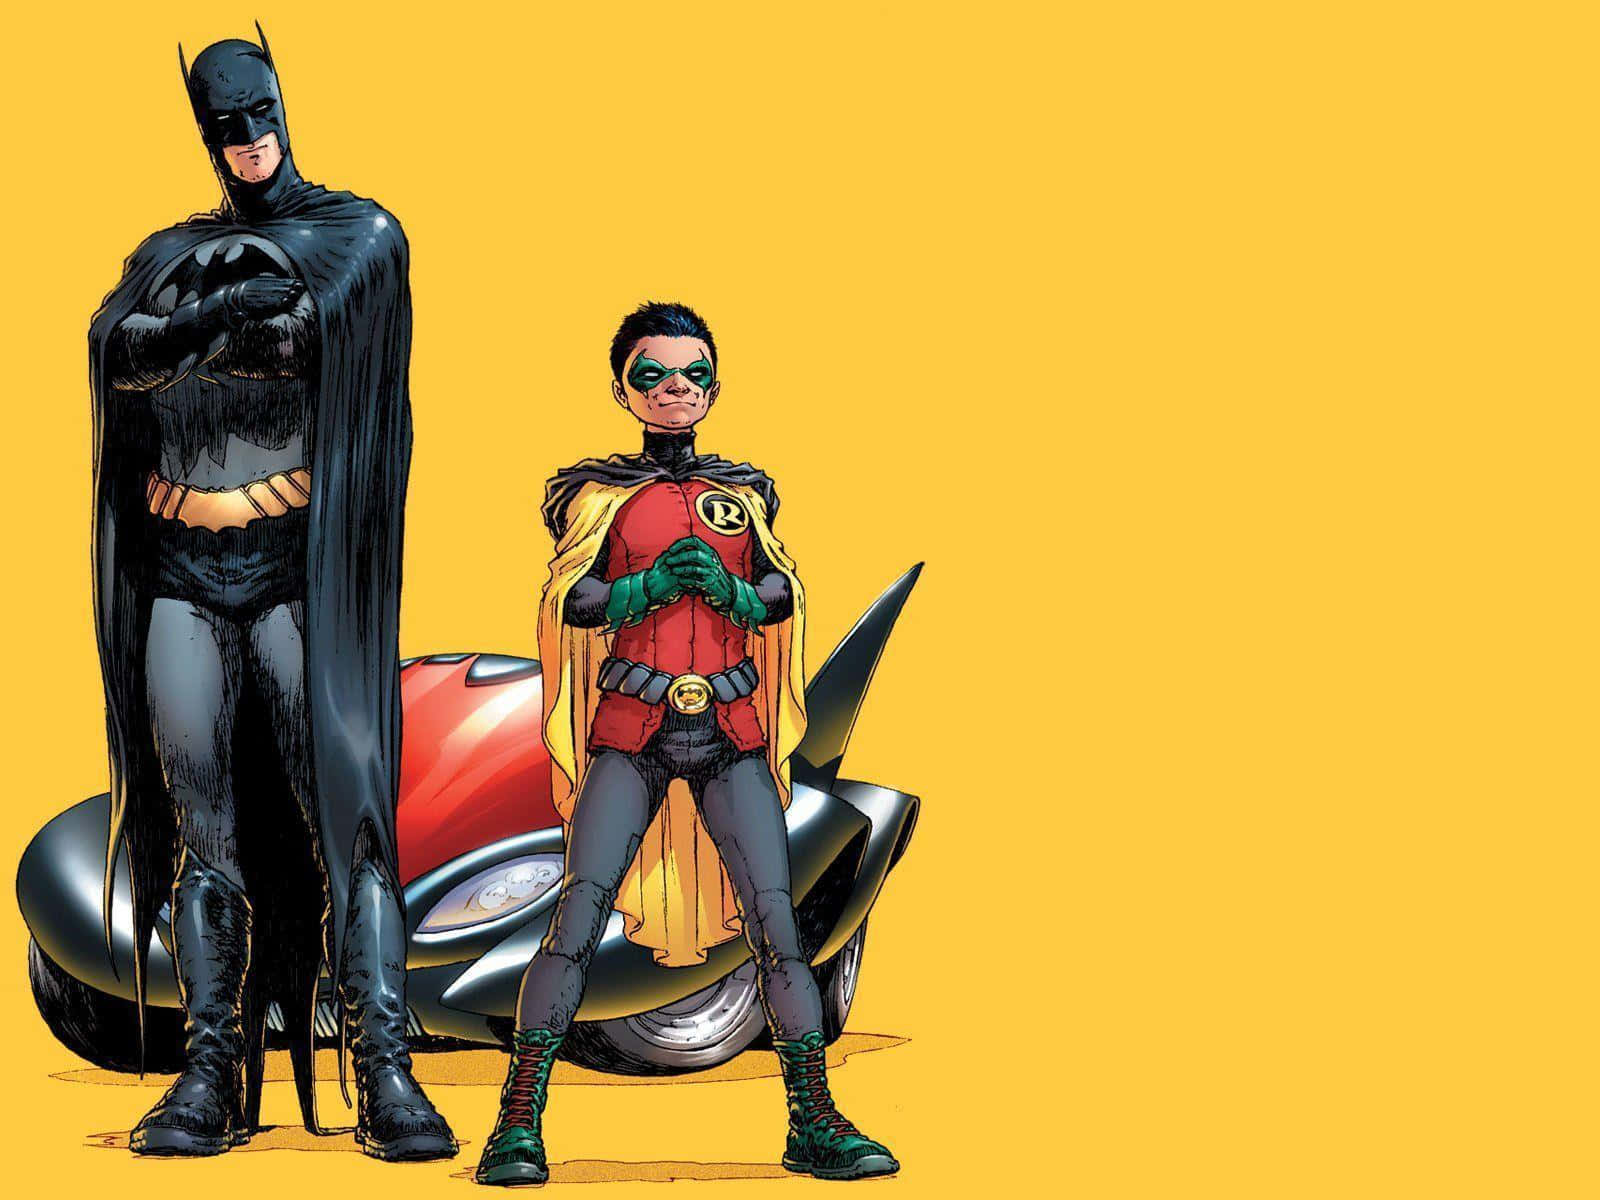 Batman and Robin Ready for Action Wallpaper